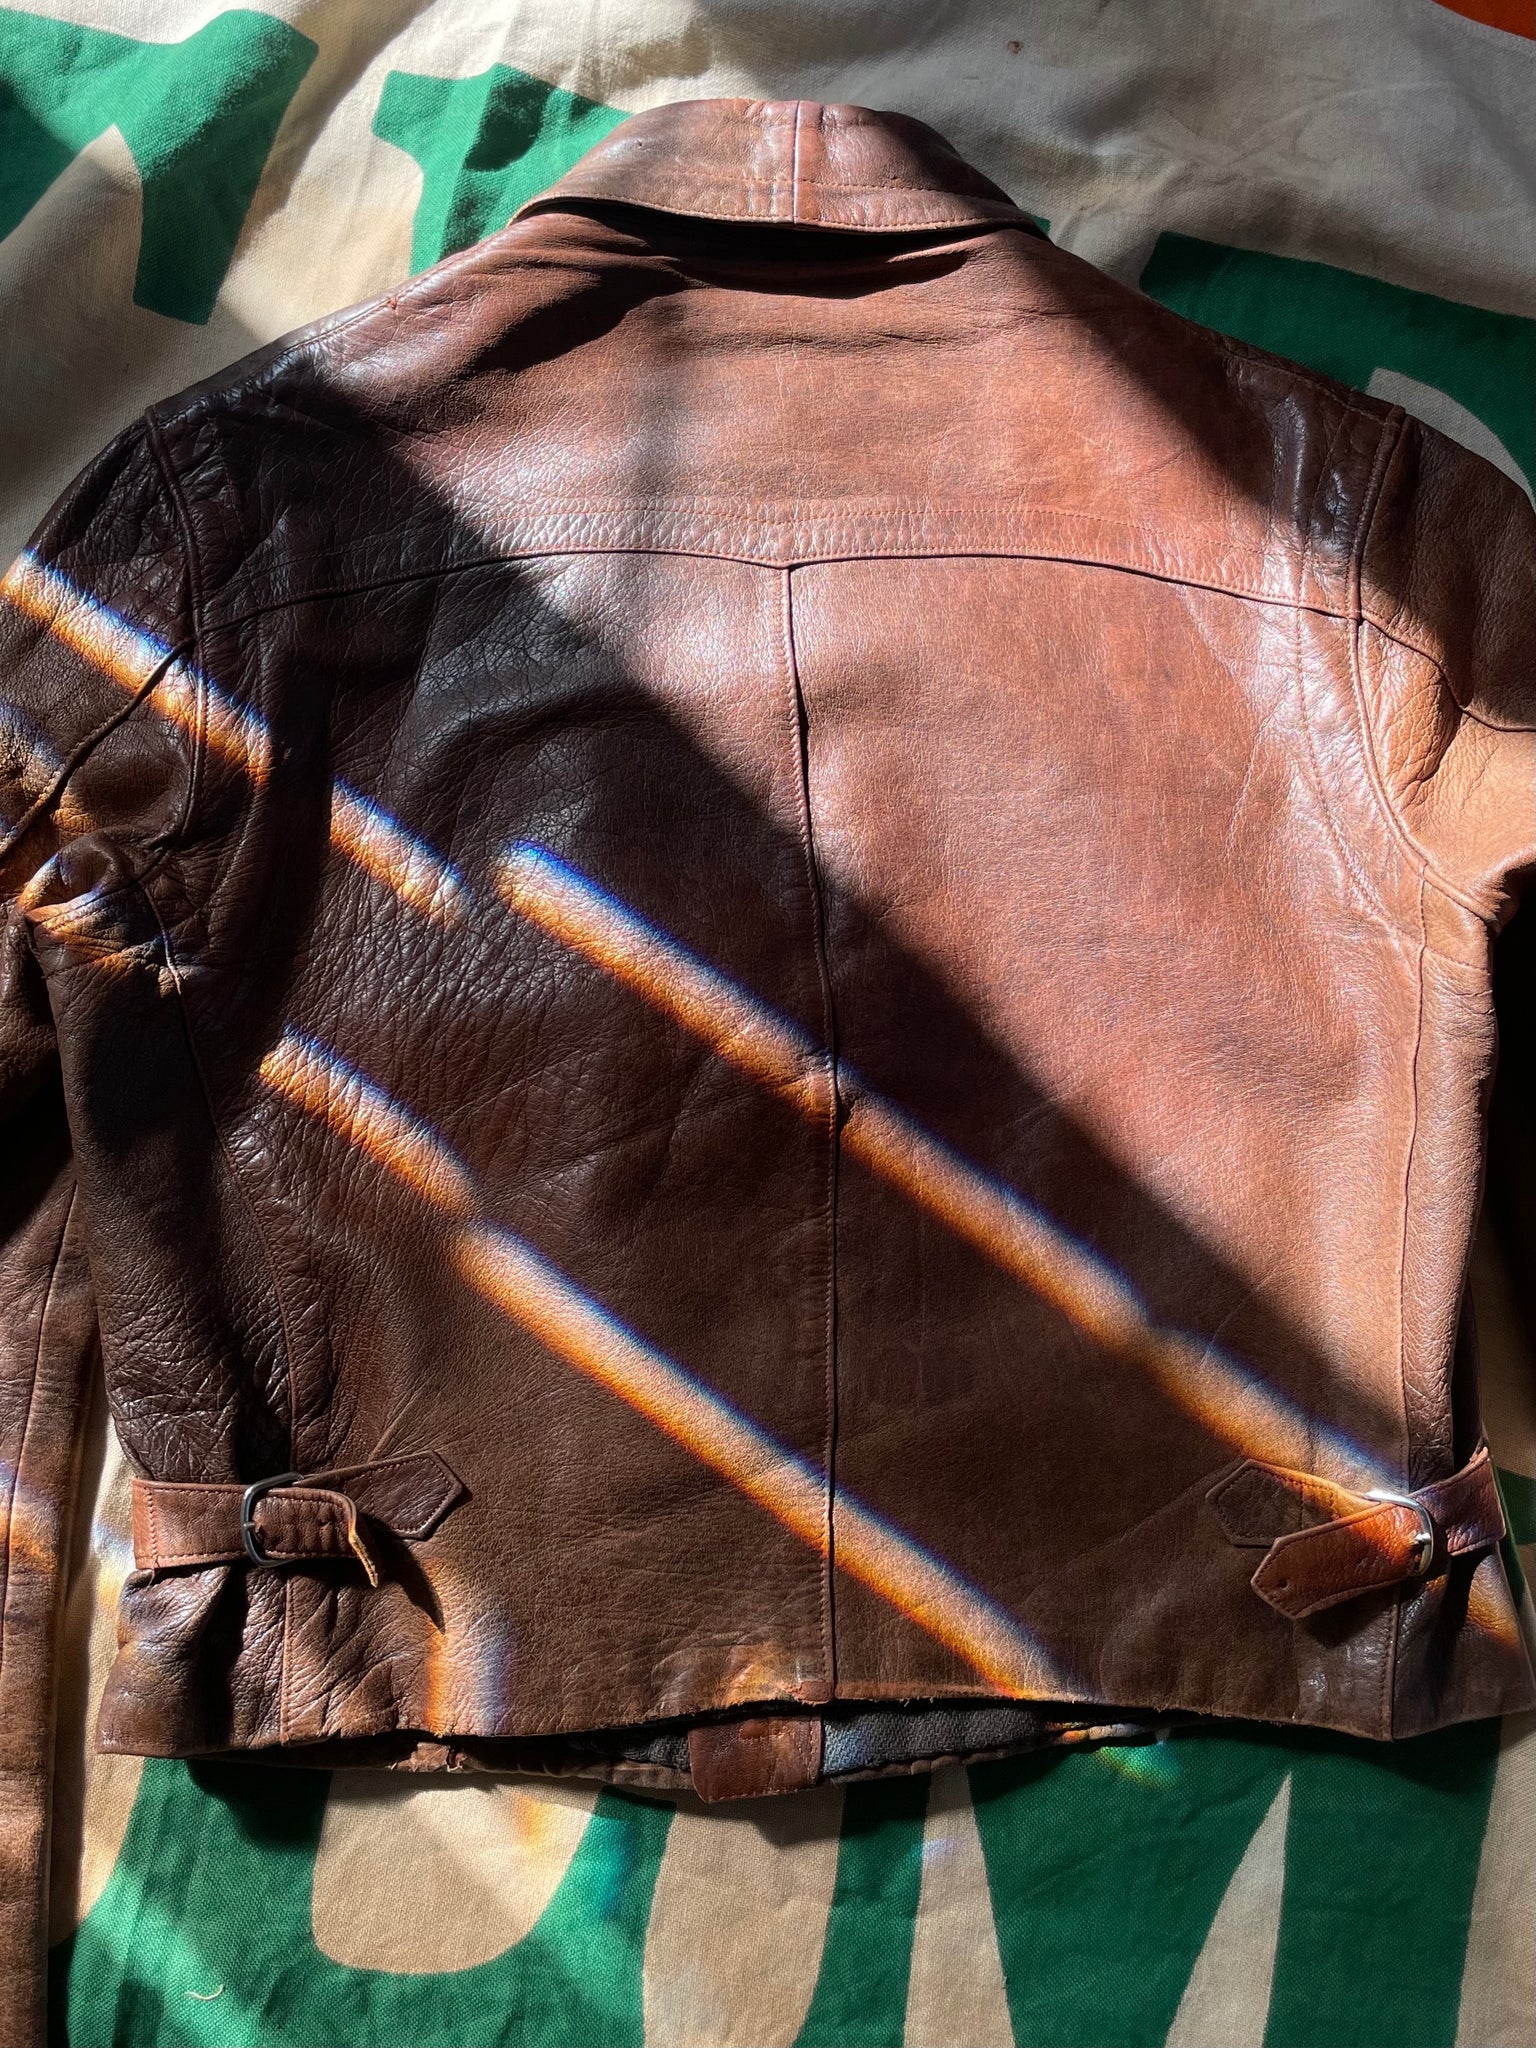 Rare 1940s Spanish Leather Side-Cinch Motorcyclist Jacket